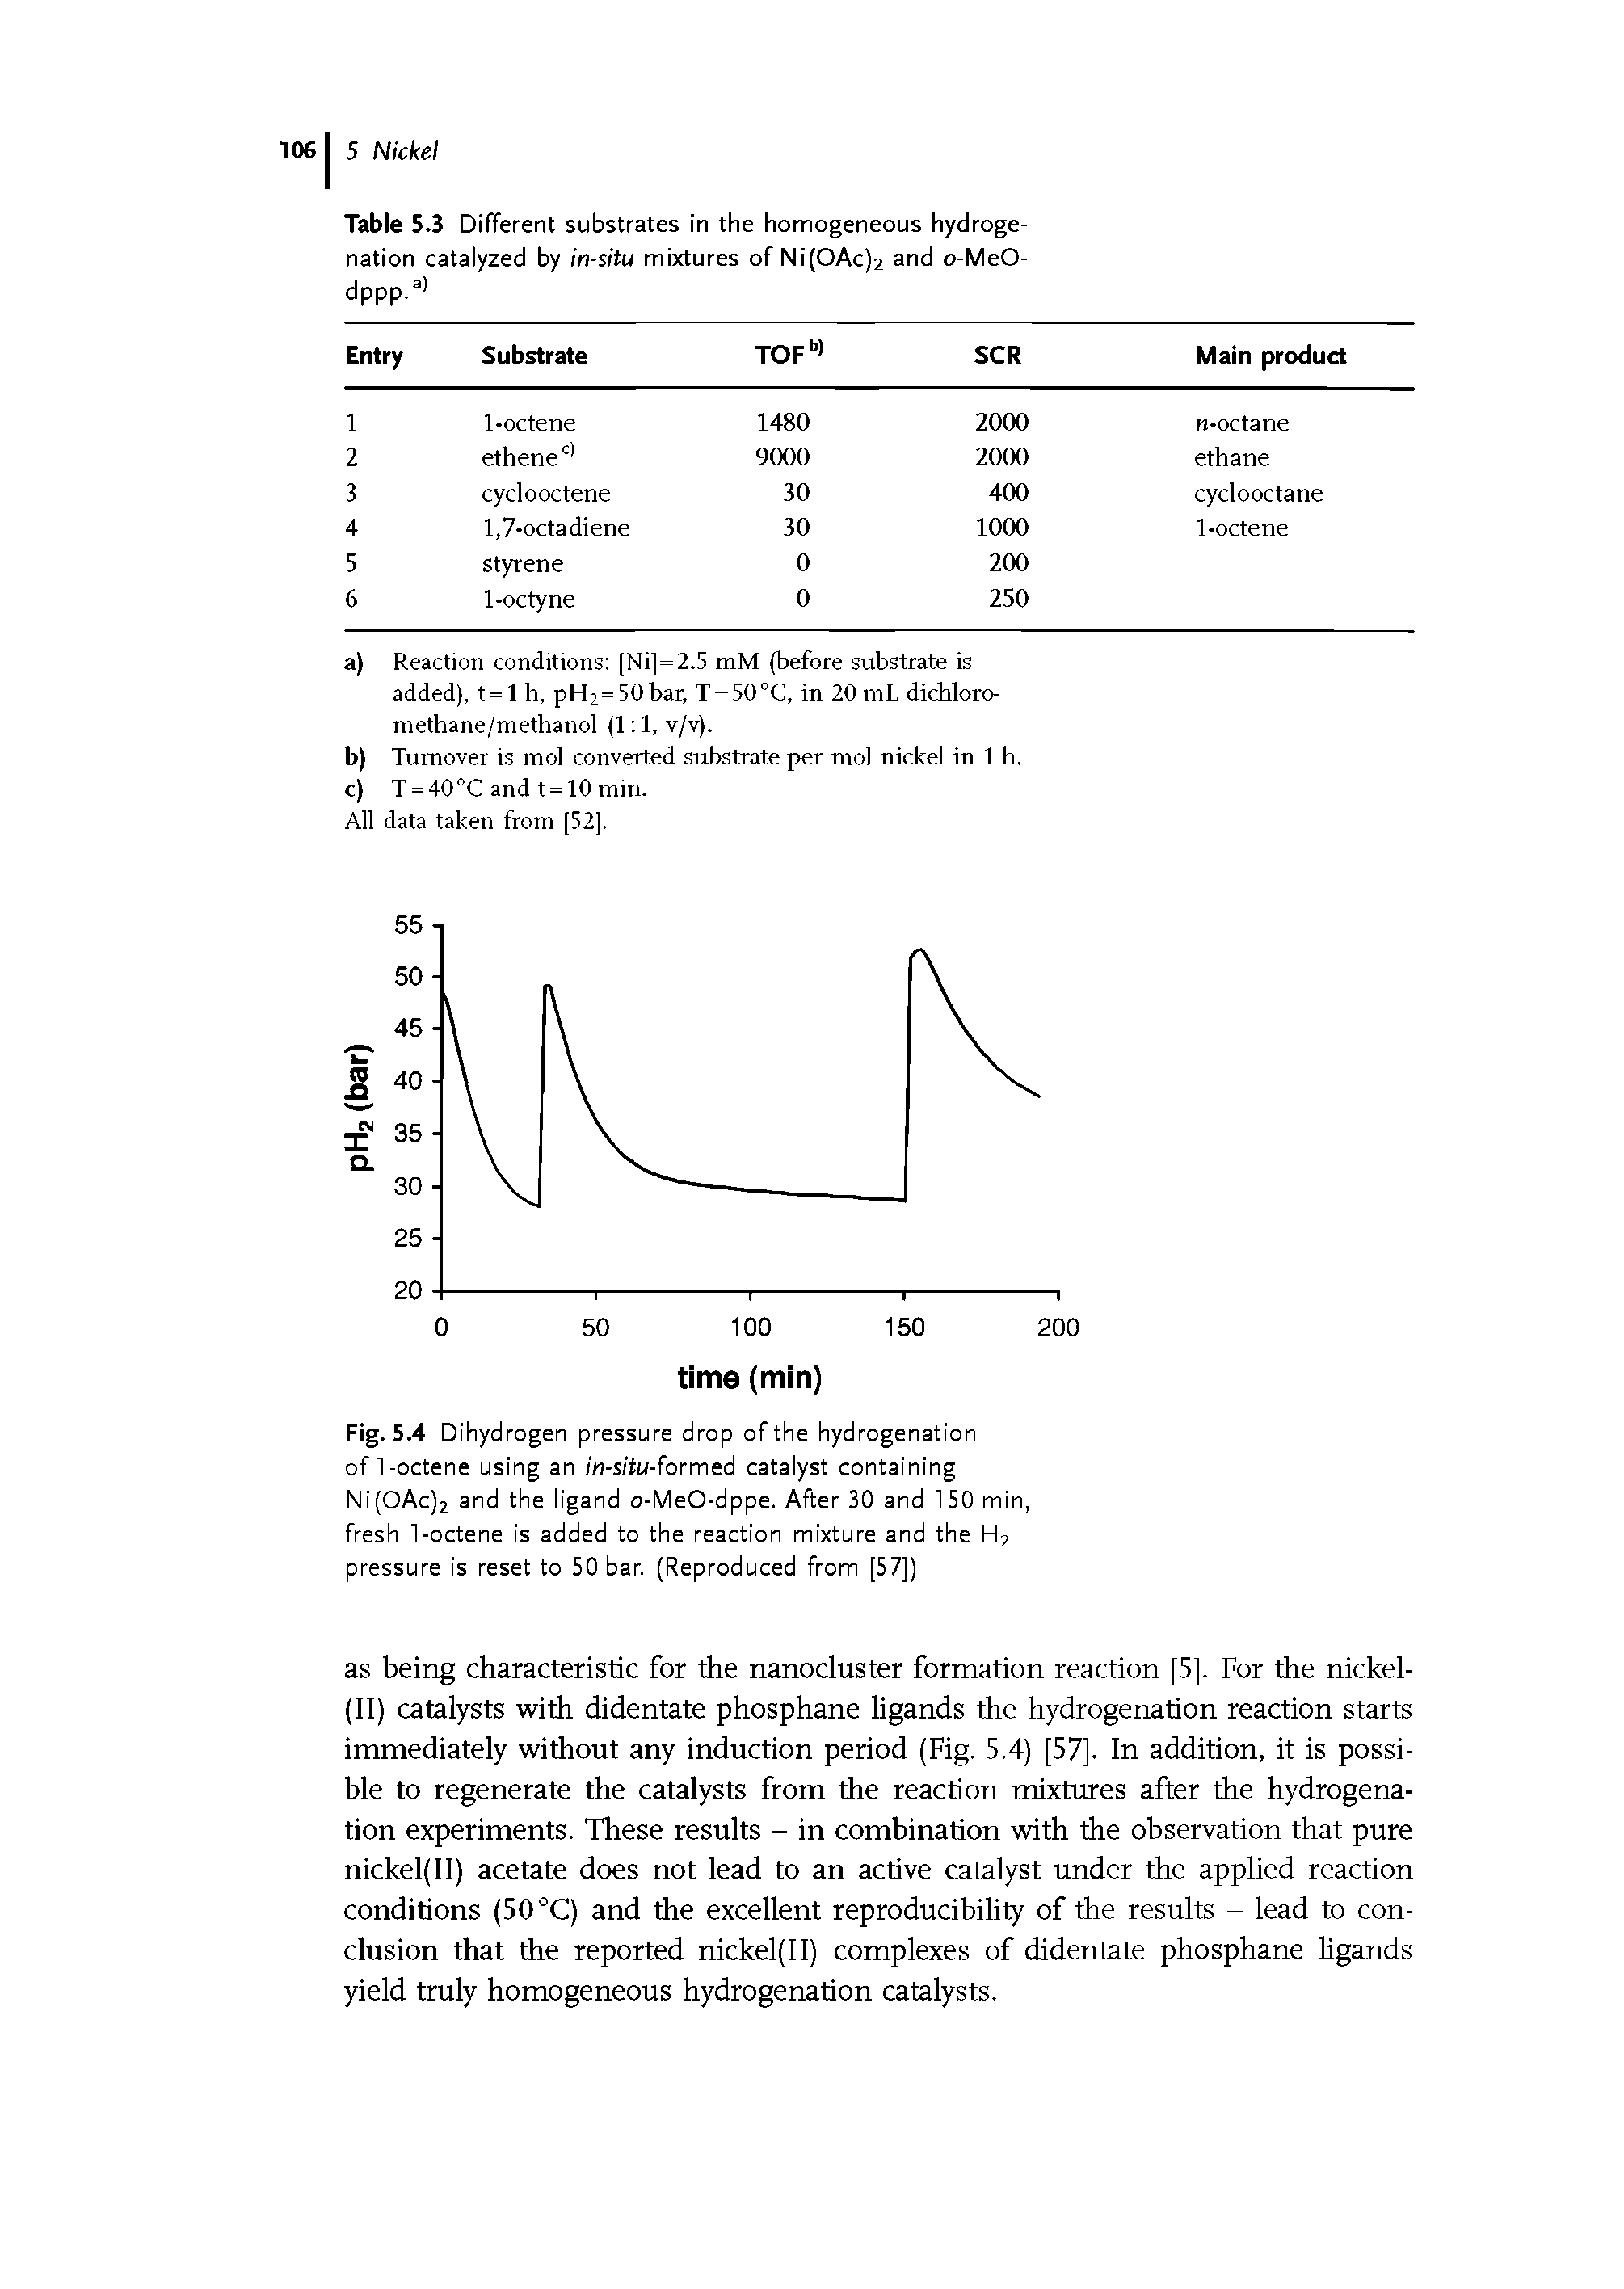 Fig. 5.4 Dihydrogen pressure drop of the hydrogenation of 1-octene using an /n-s/tM-formed catalyst containing Ni(OAc)2 and the ligand o-MeO-dppe. After 30 and 150 min, fresh 1-octene is added to the reaction mixture and the H2 pressure is reset to 50 bar. (Reproduced from [57])...